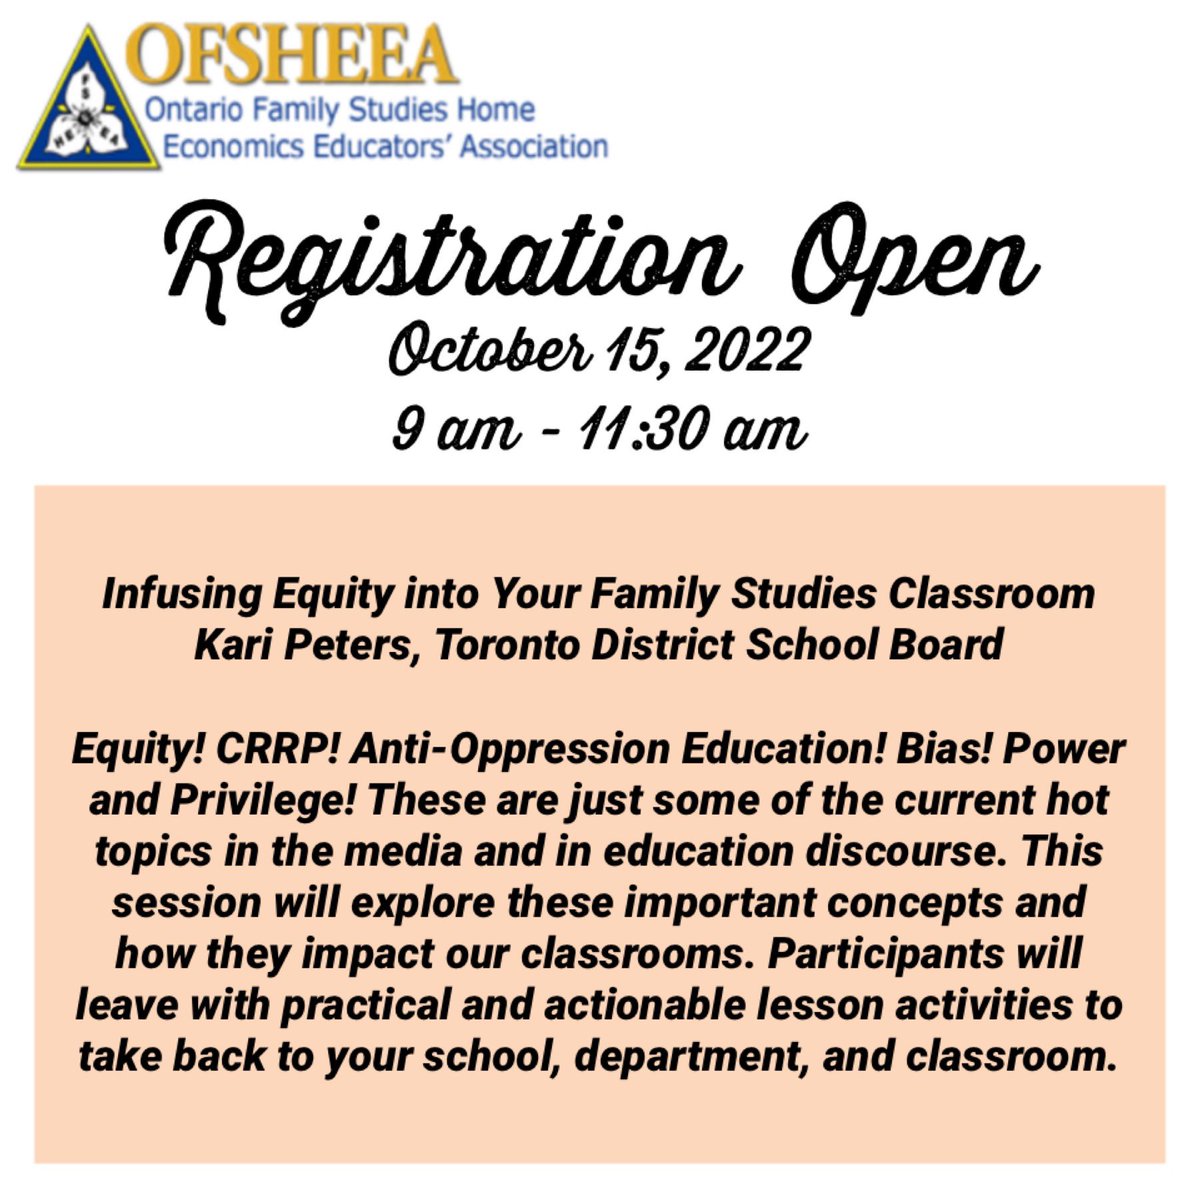 This is the first of many FREE PD opportunities for OFSHEEA members this coming year. For non-members the cost is $5 and can be submitted via etransfer at ofsheea@ofsheea.ca Registration Here: forms.gle/YnaDm3StqWkSvk…